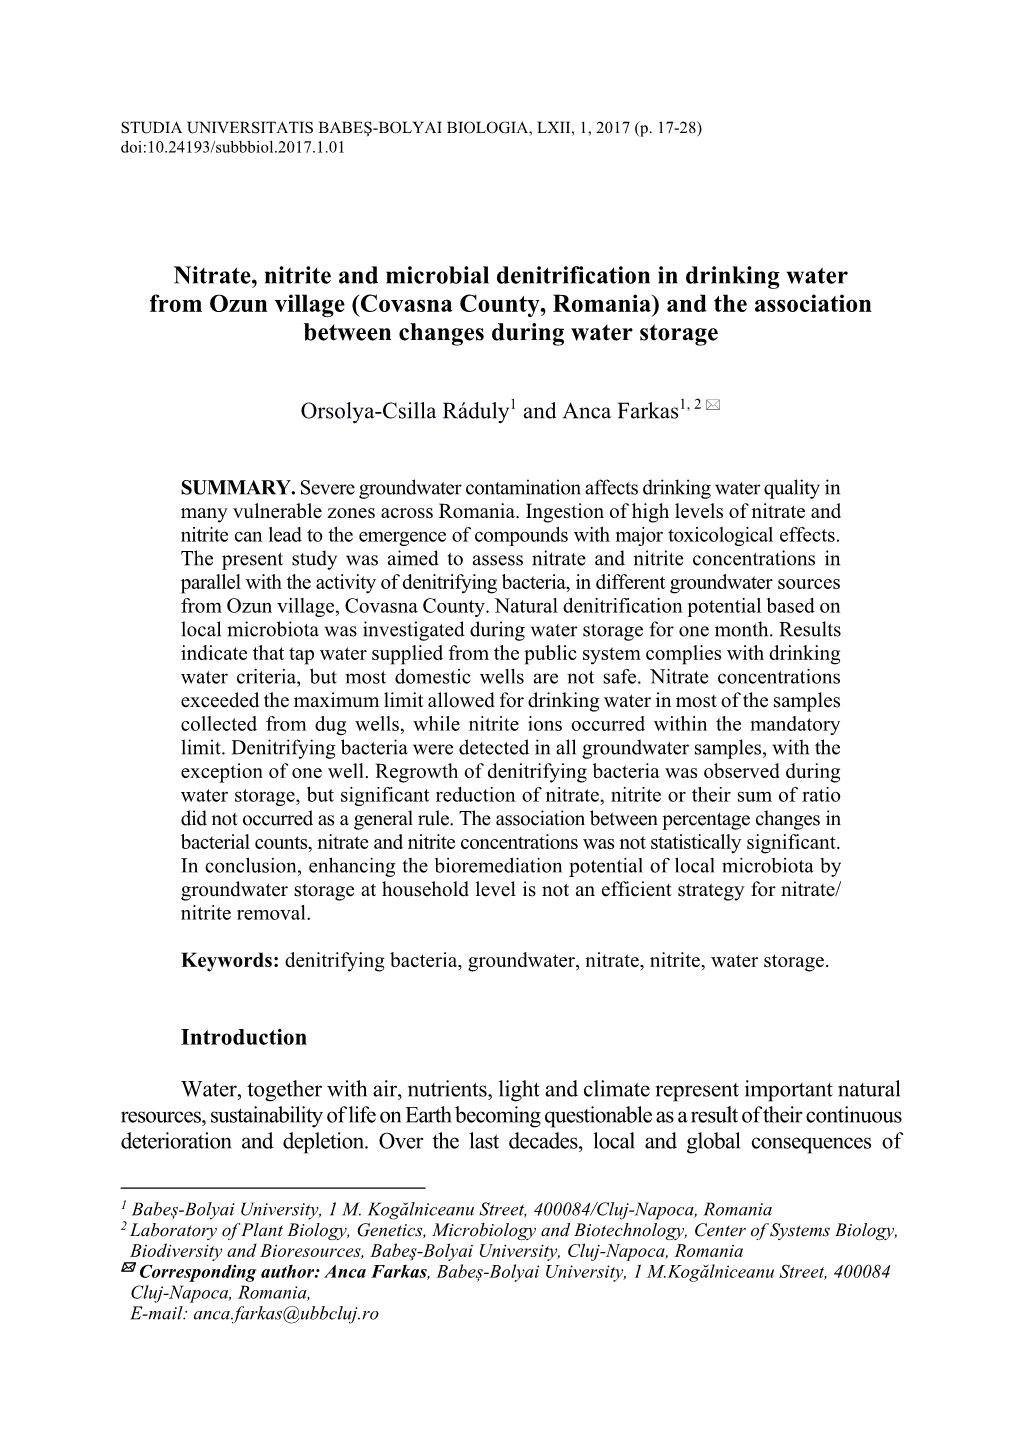 Nitrate, Nitrite and Microbial Denitrification in Drinking Water from Ozun Village (Covasna County, Romania) and the Association Between Changes During Water Storage